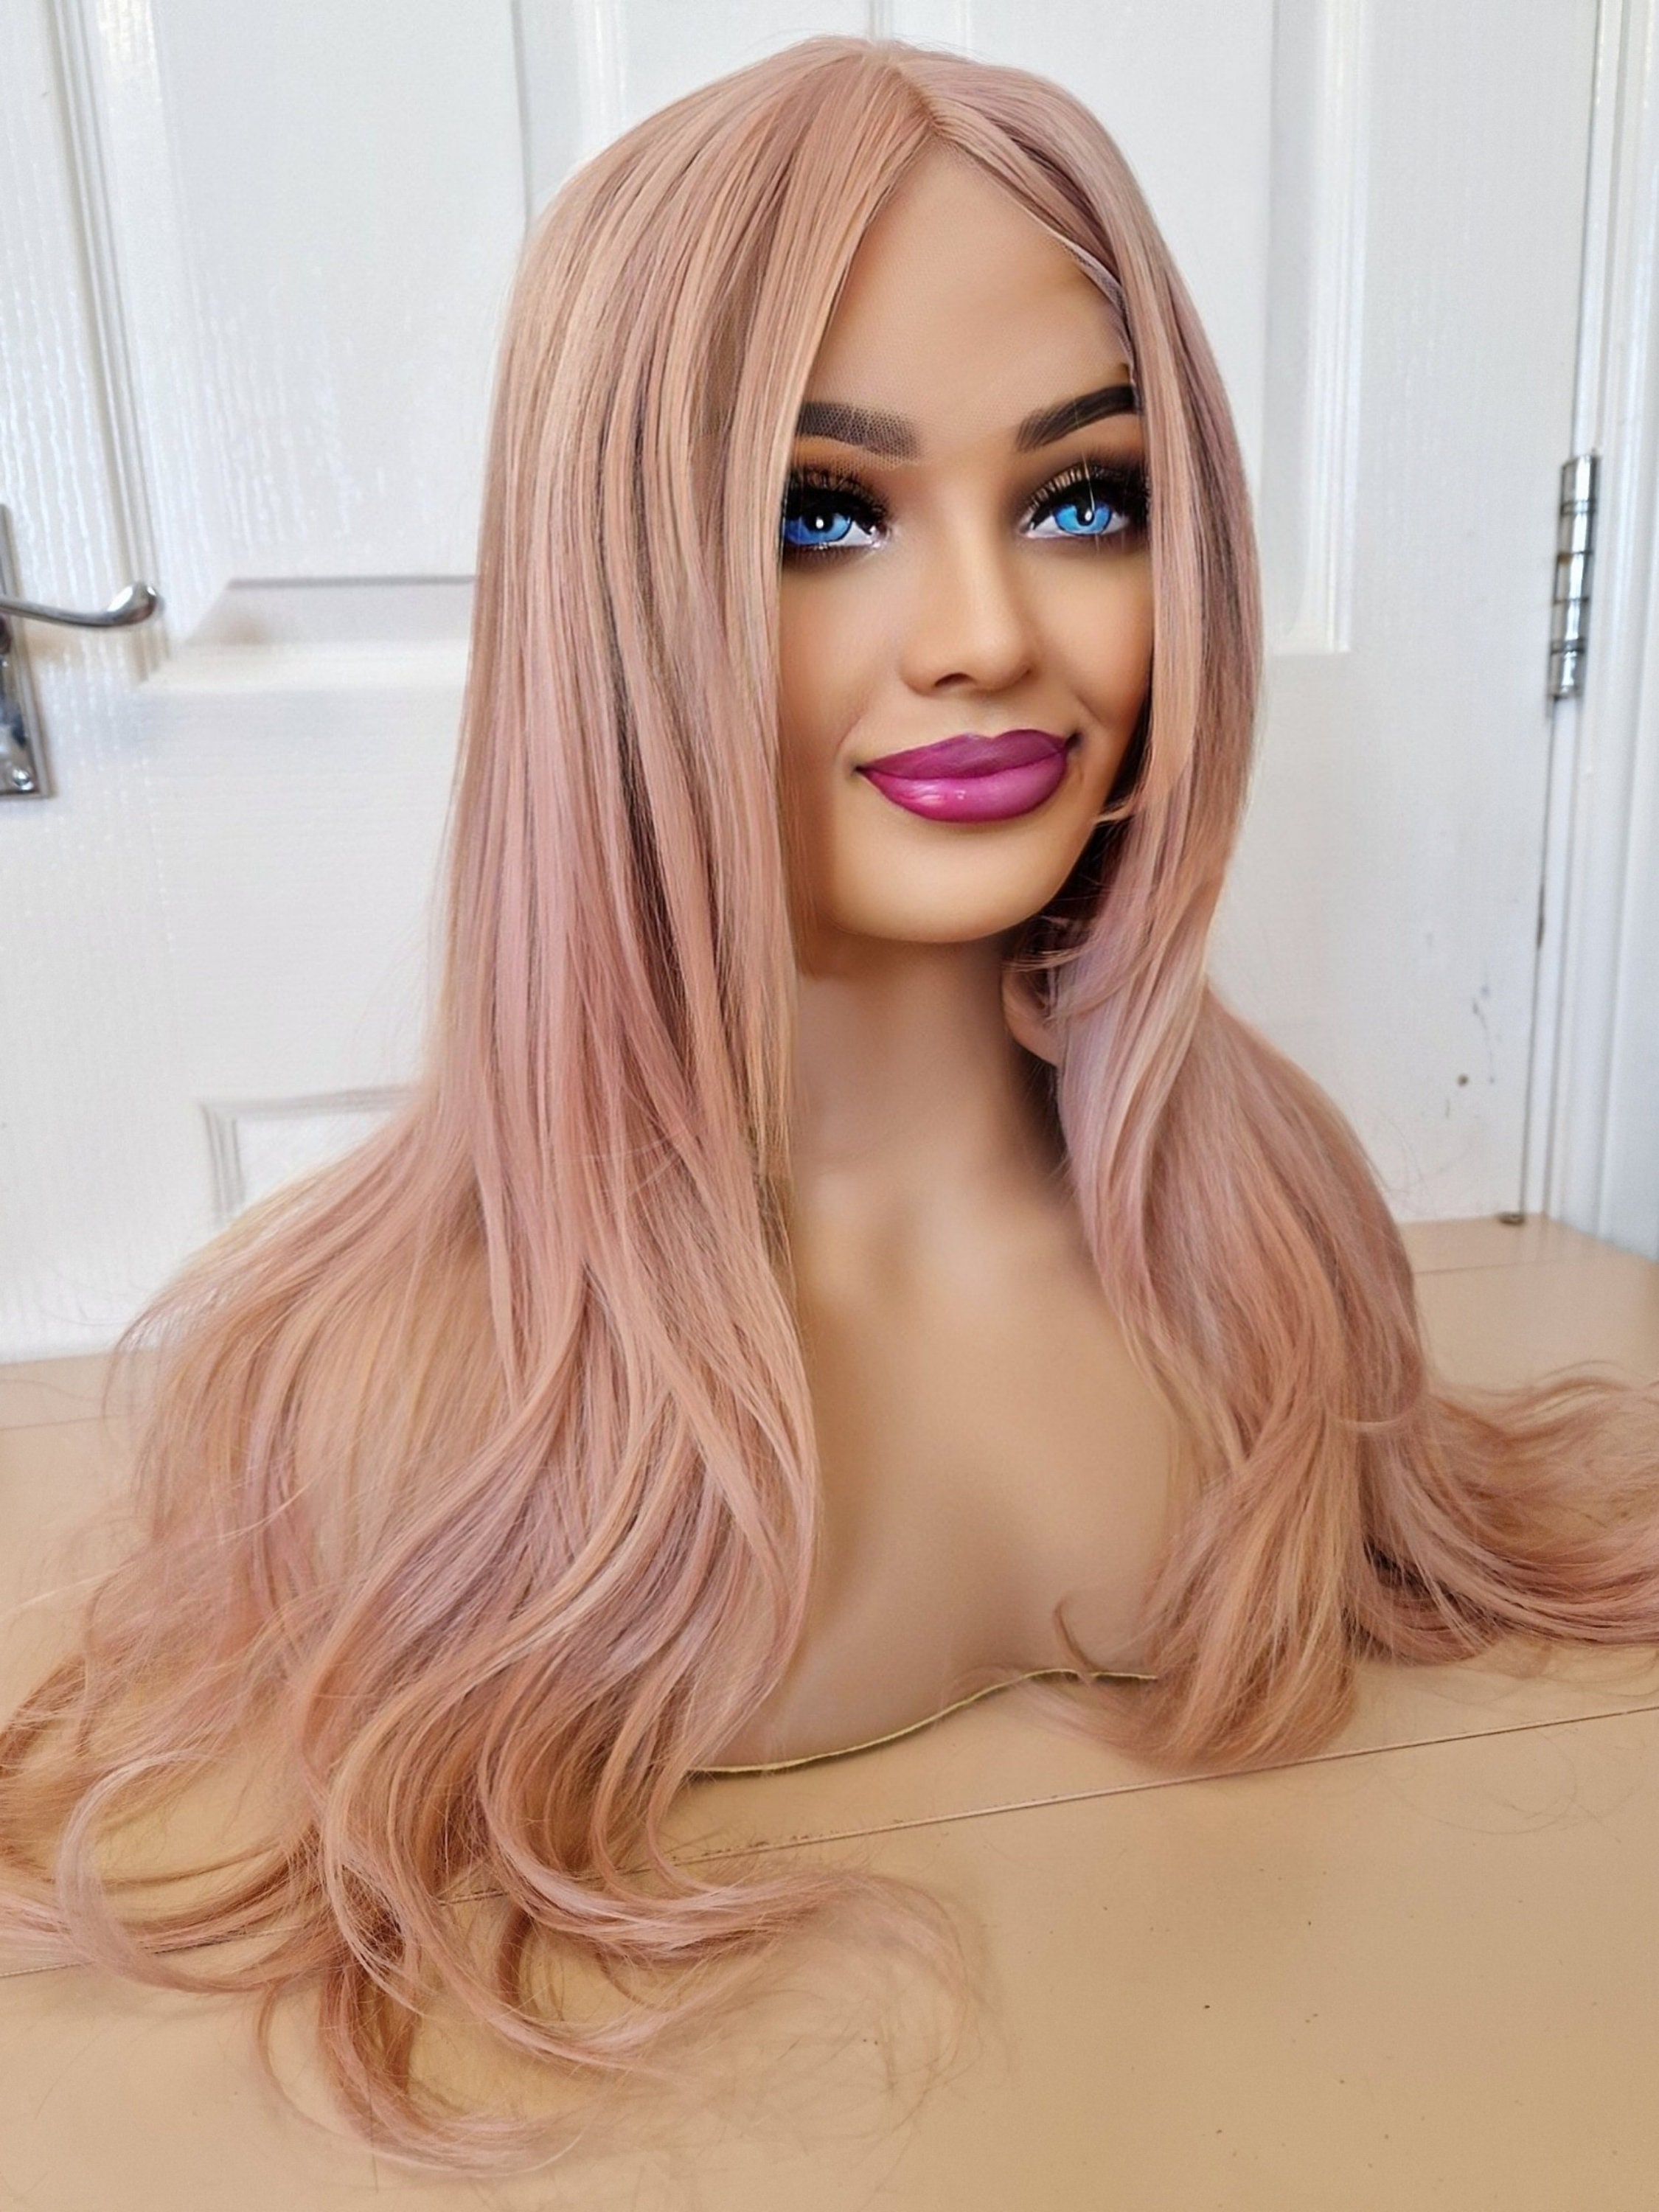 Pinkie, Pink Synthetic Lace Front Wig, freepart Wig Long, Curly